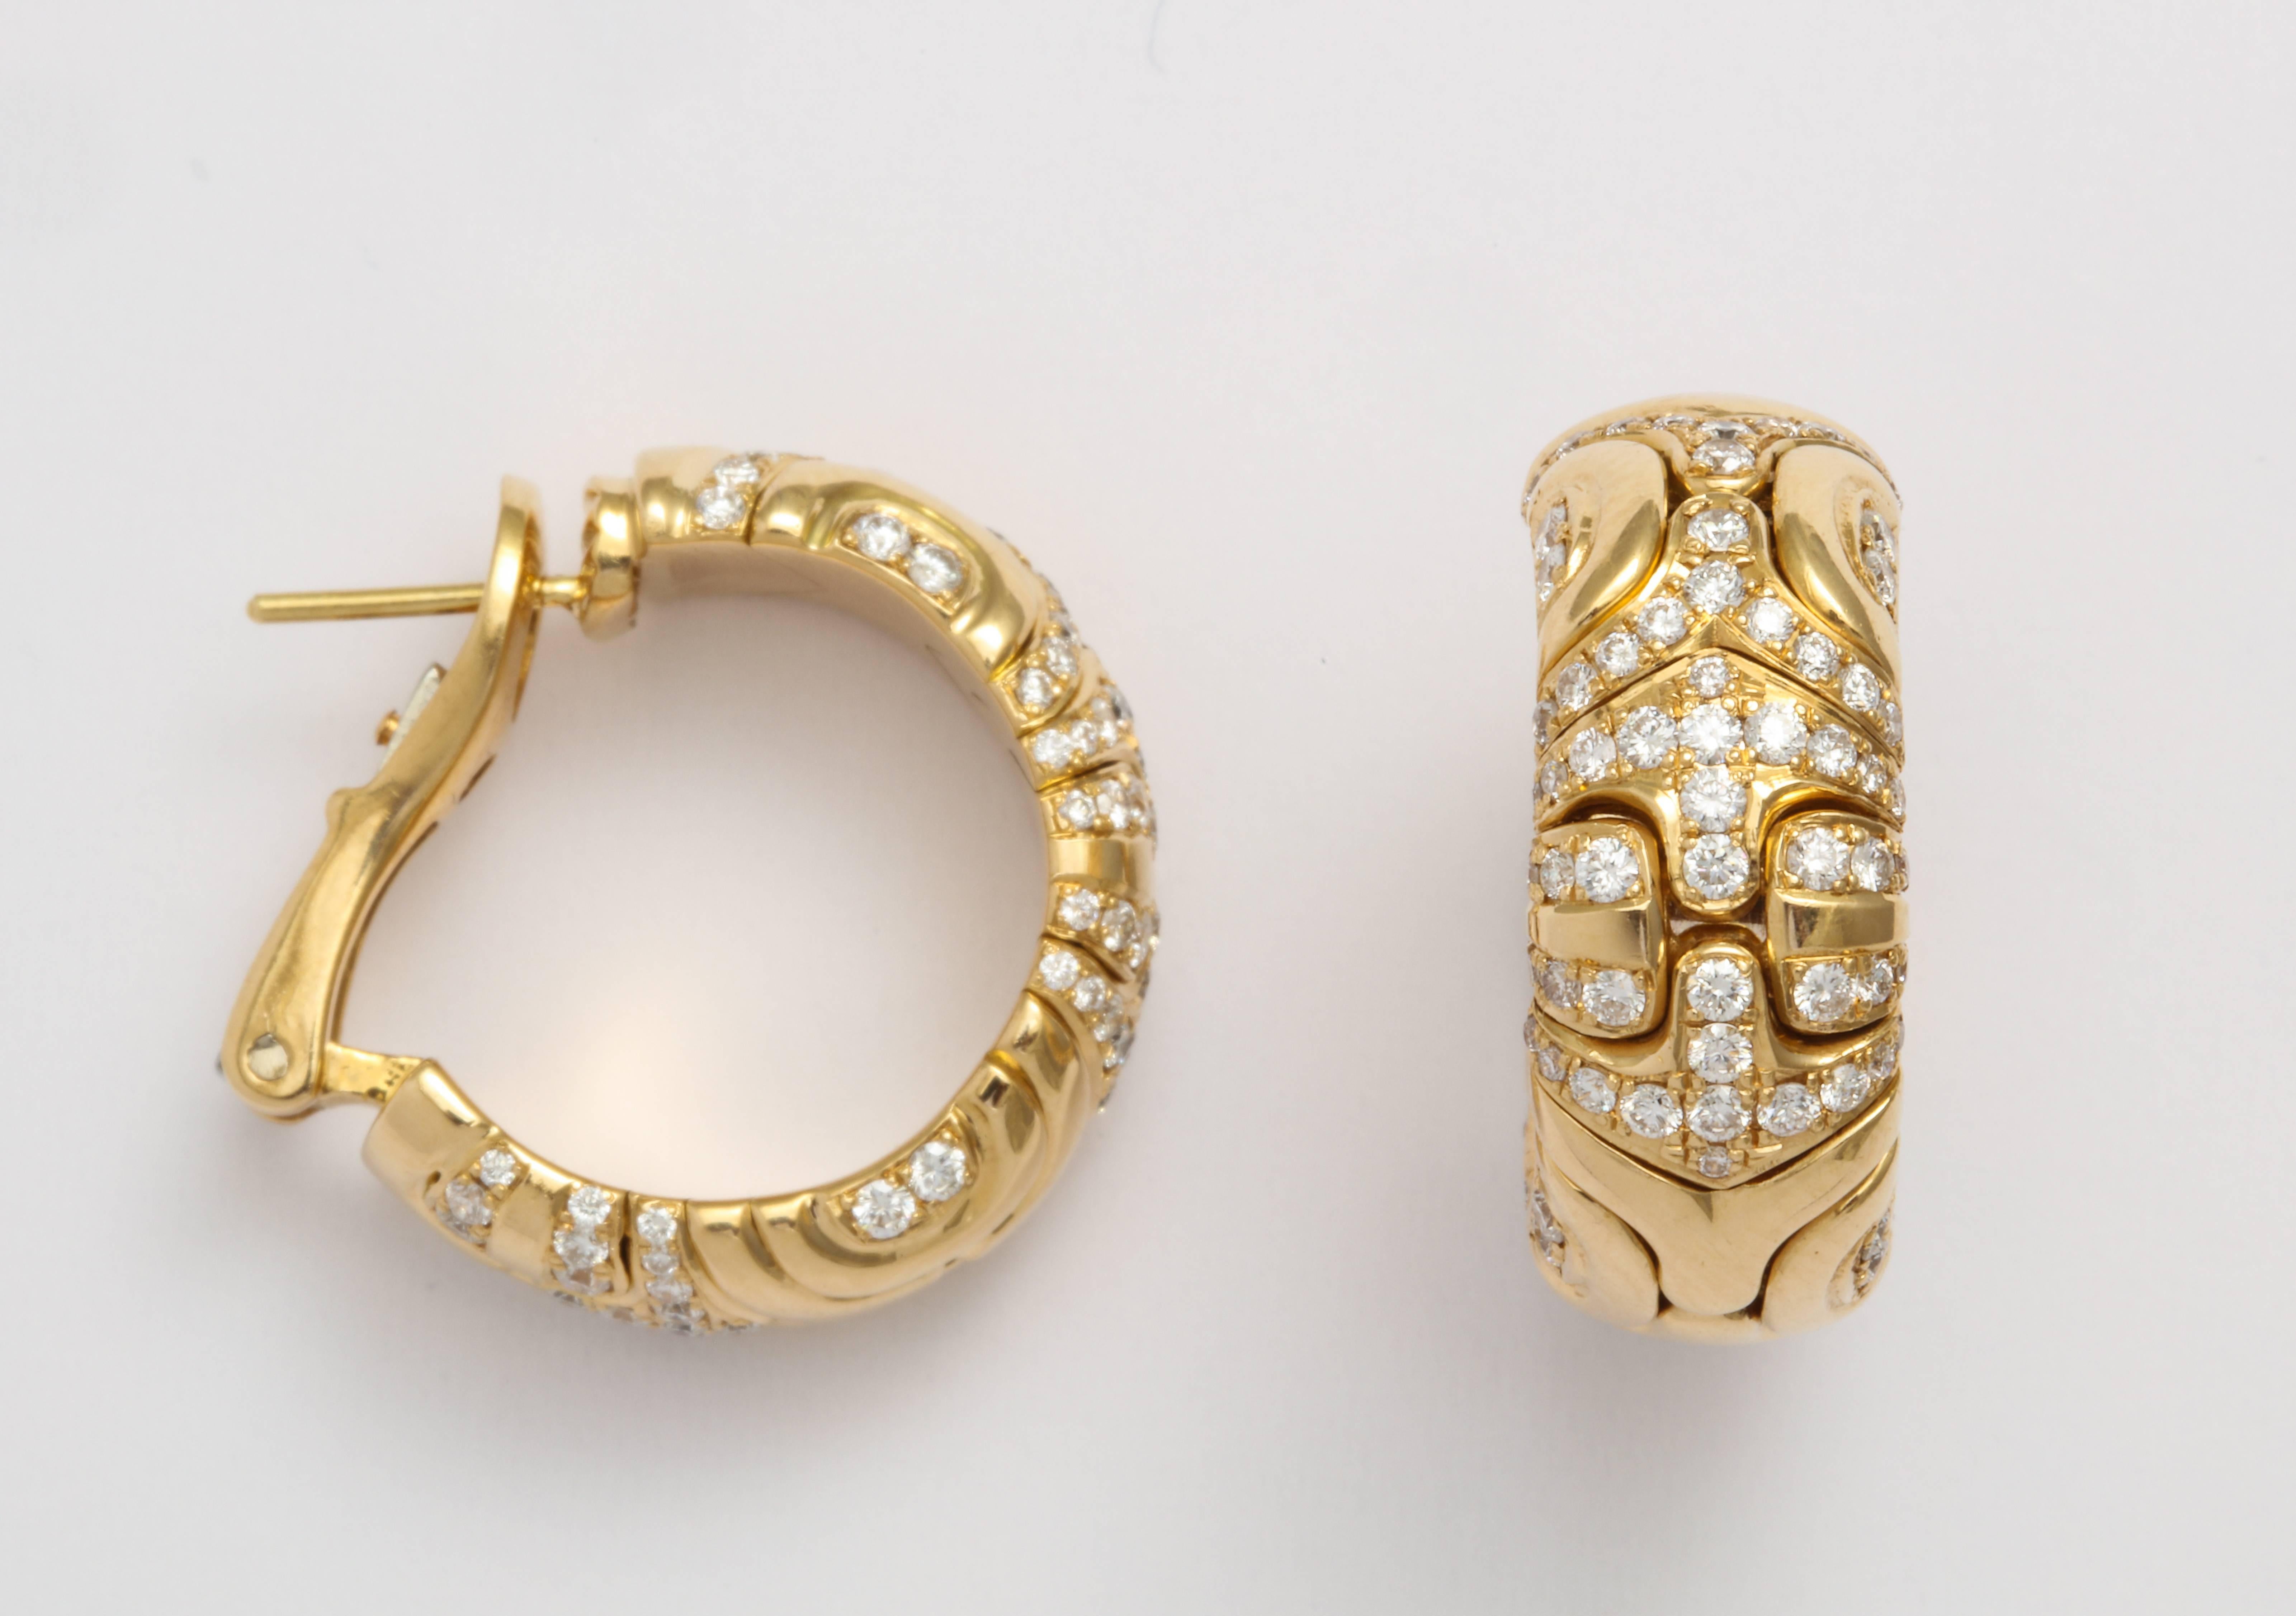 A pair of 18 karat yellow gold hoop earrings by Bulgari in the Parentesi style. A total diamond weight of approximately 3.36 carats. Made in Italy. Circa 1980s.
